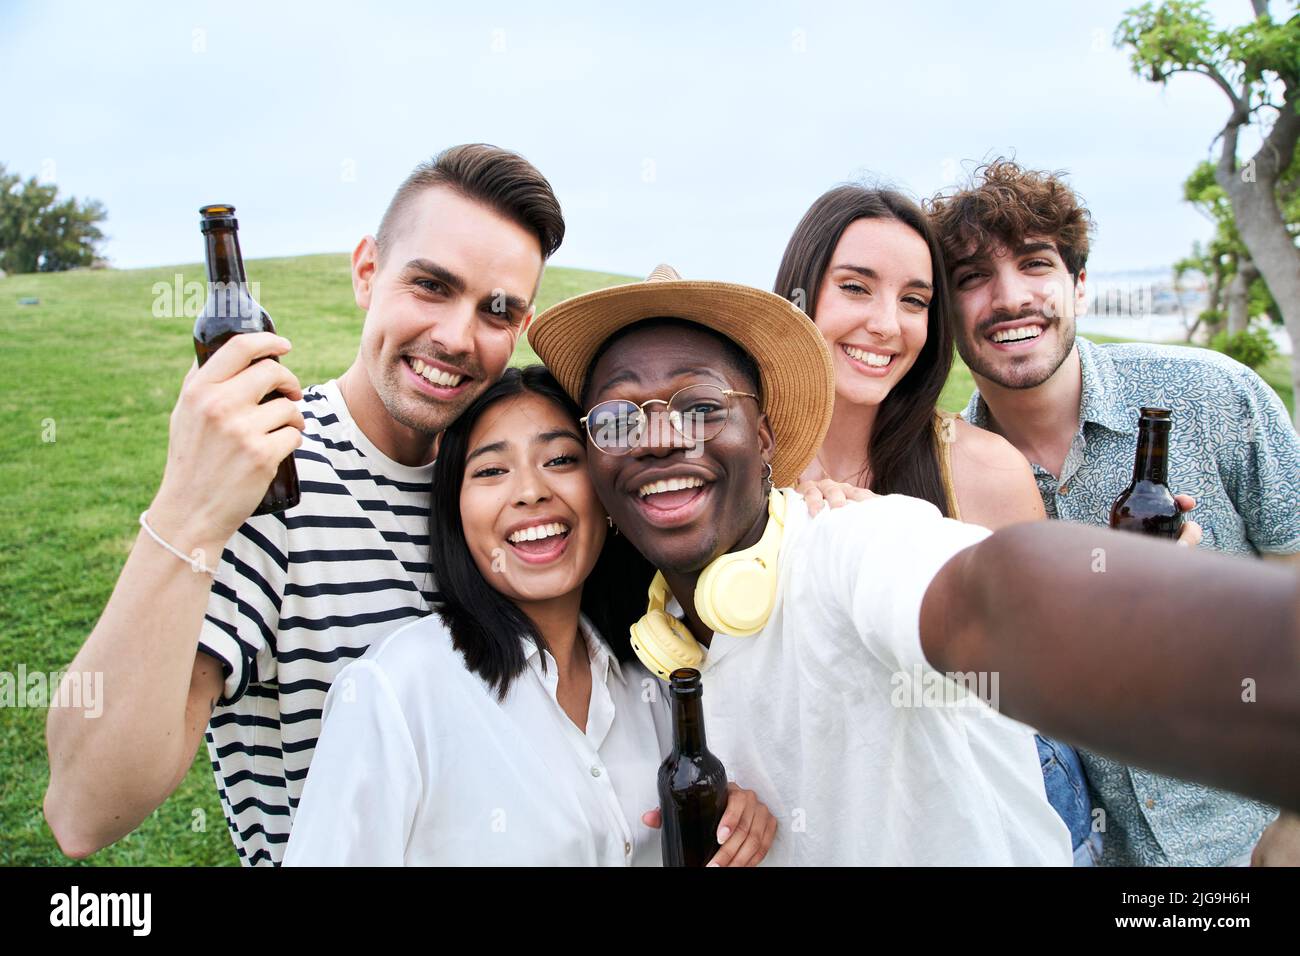 Group of five cheerful young friends taking selfie portrait. Happy people looking at the camera smiling. Concept of community, youth lifestyle and Stock Photo